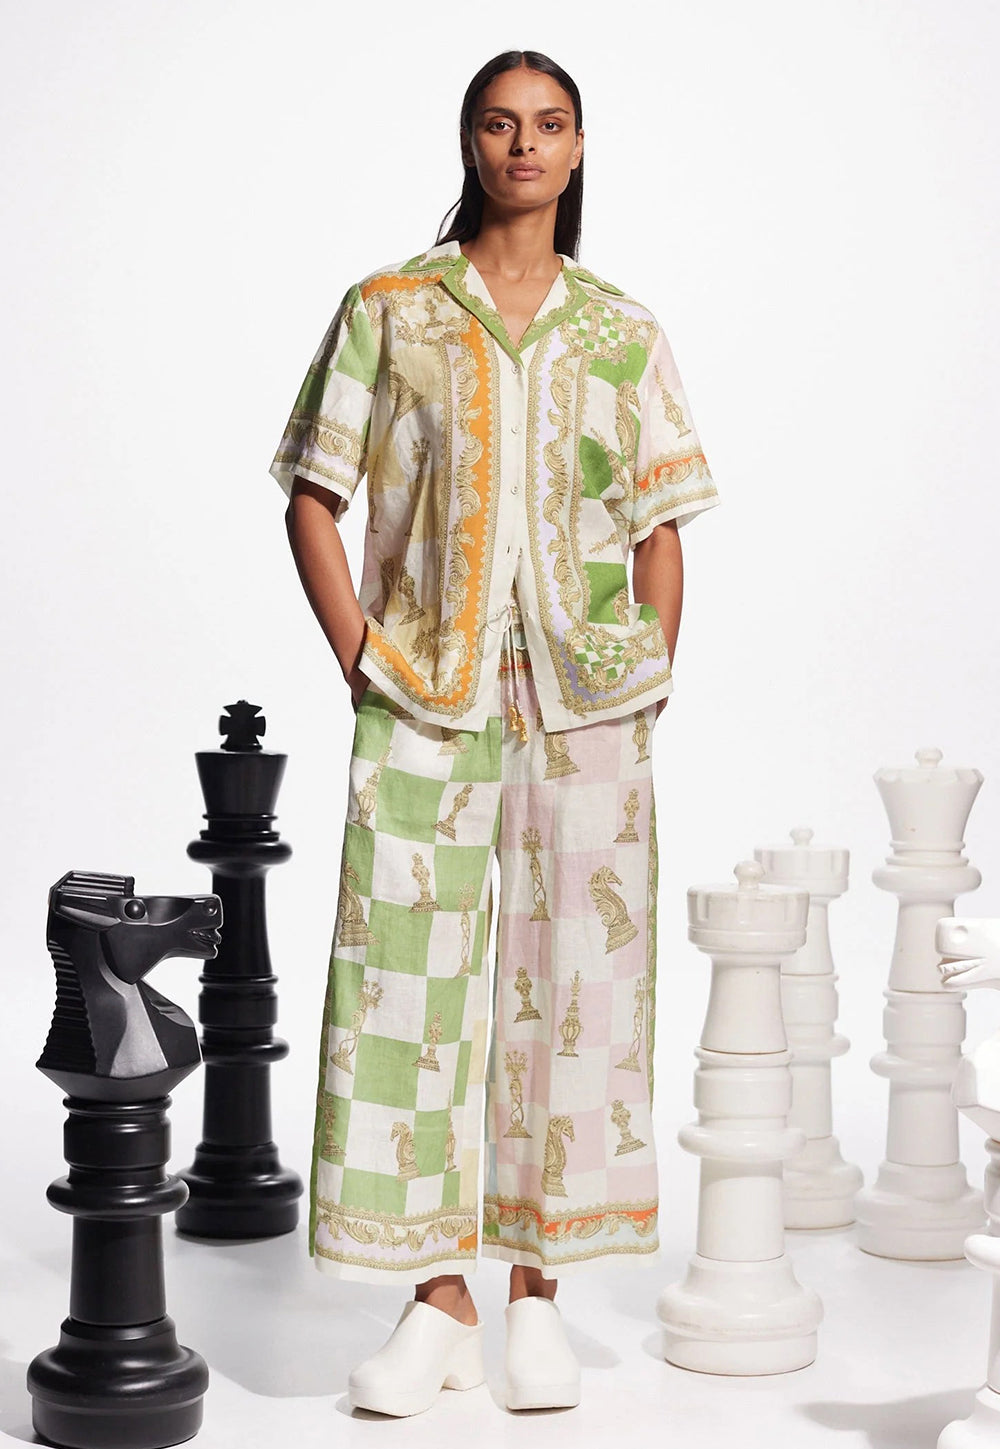 Checkmate Linen Shirt - Multi sold by Angel Divine